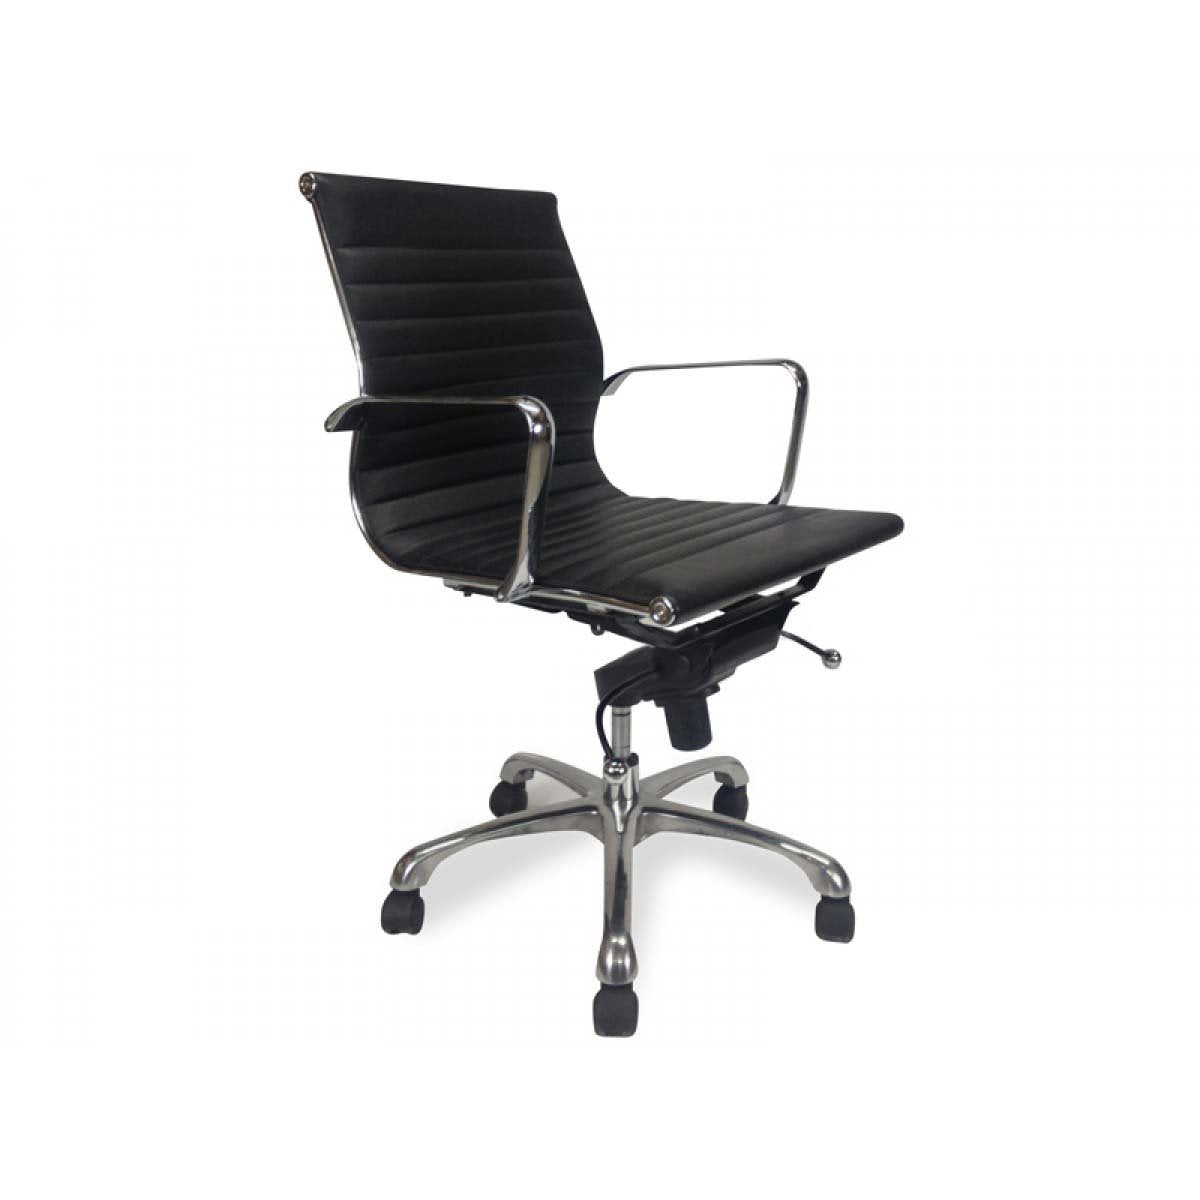 Ellie Leather Office Chair - Black